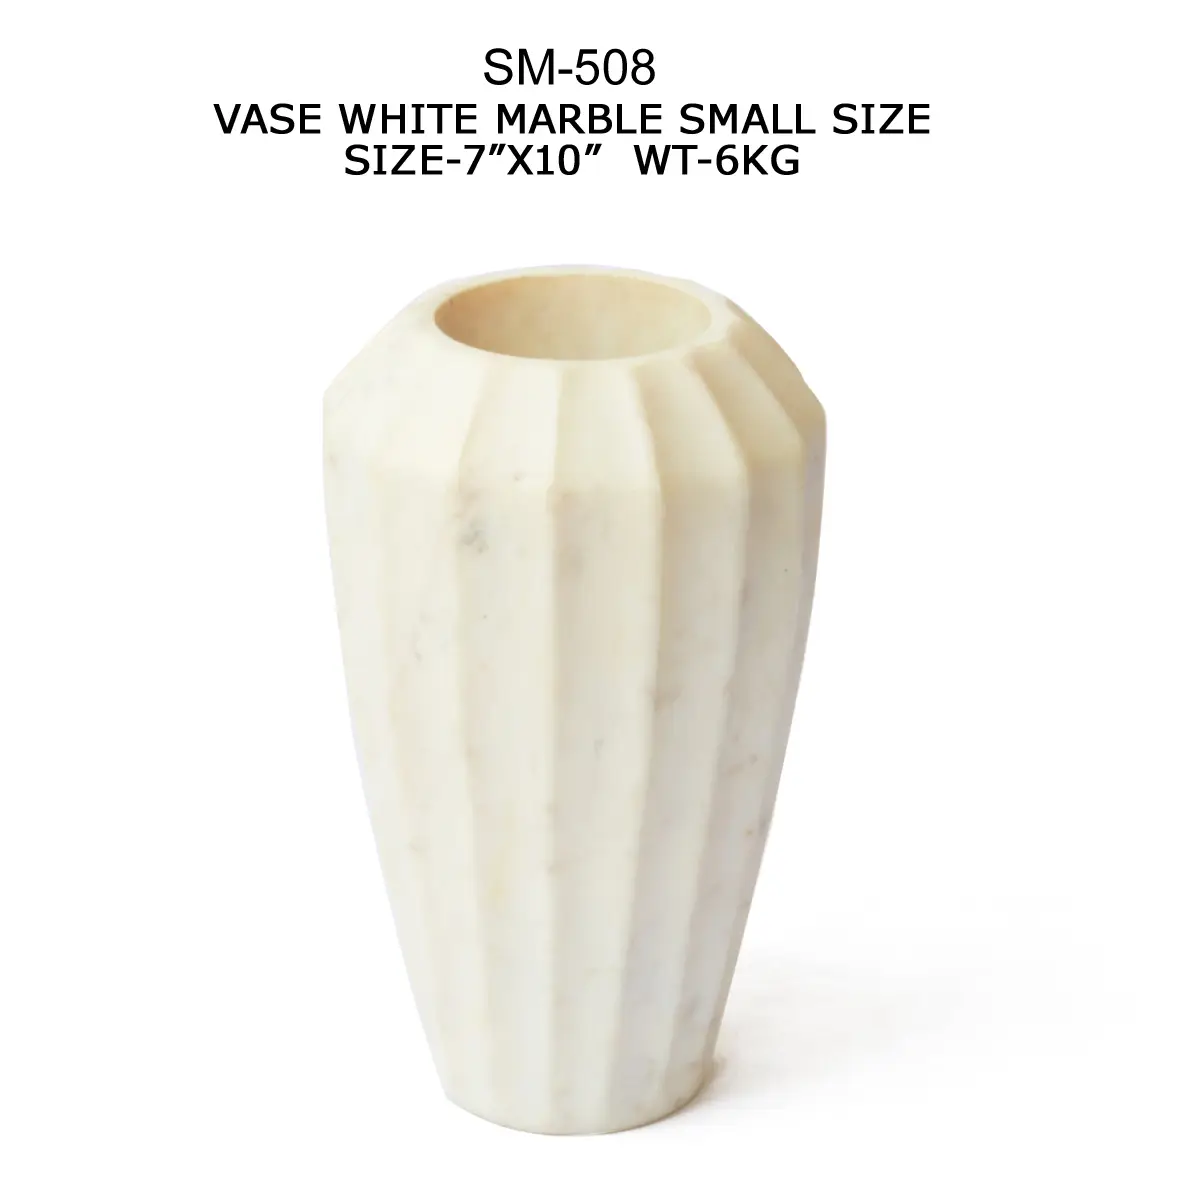 VASE SAMPLE NO. 7 IN WHITE MARBLE SMALL SIZE